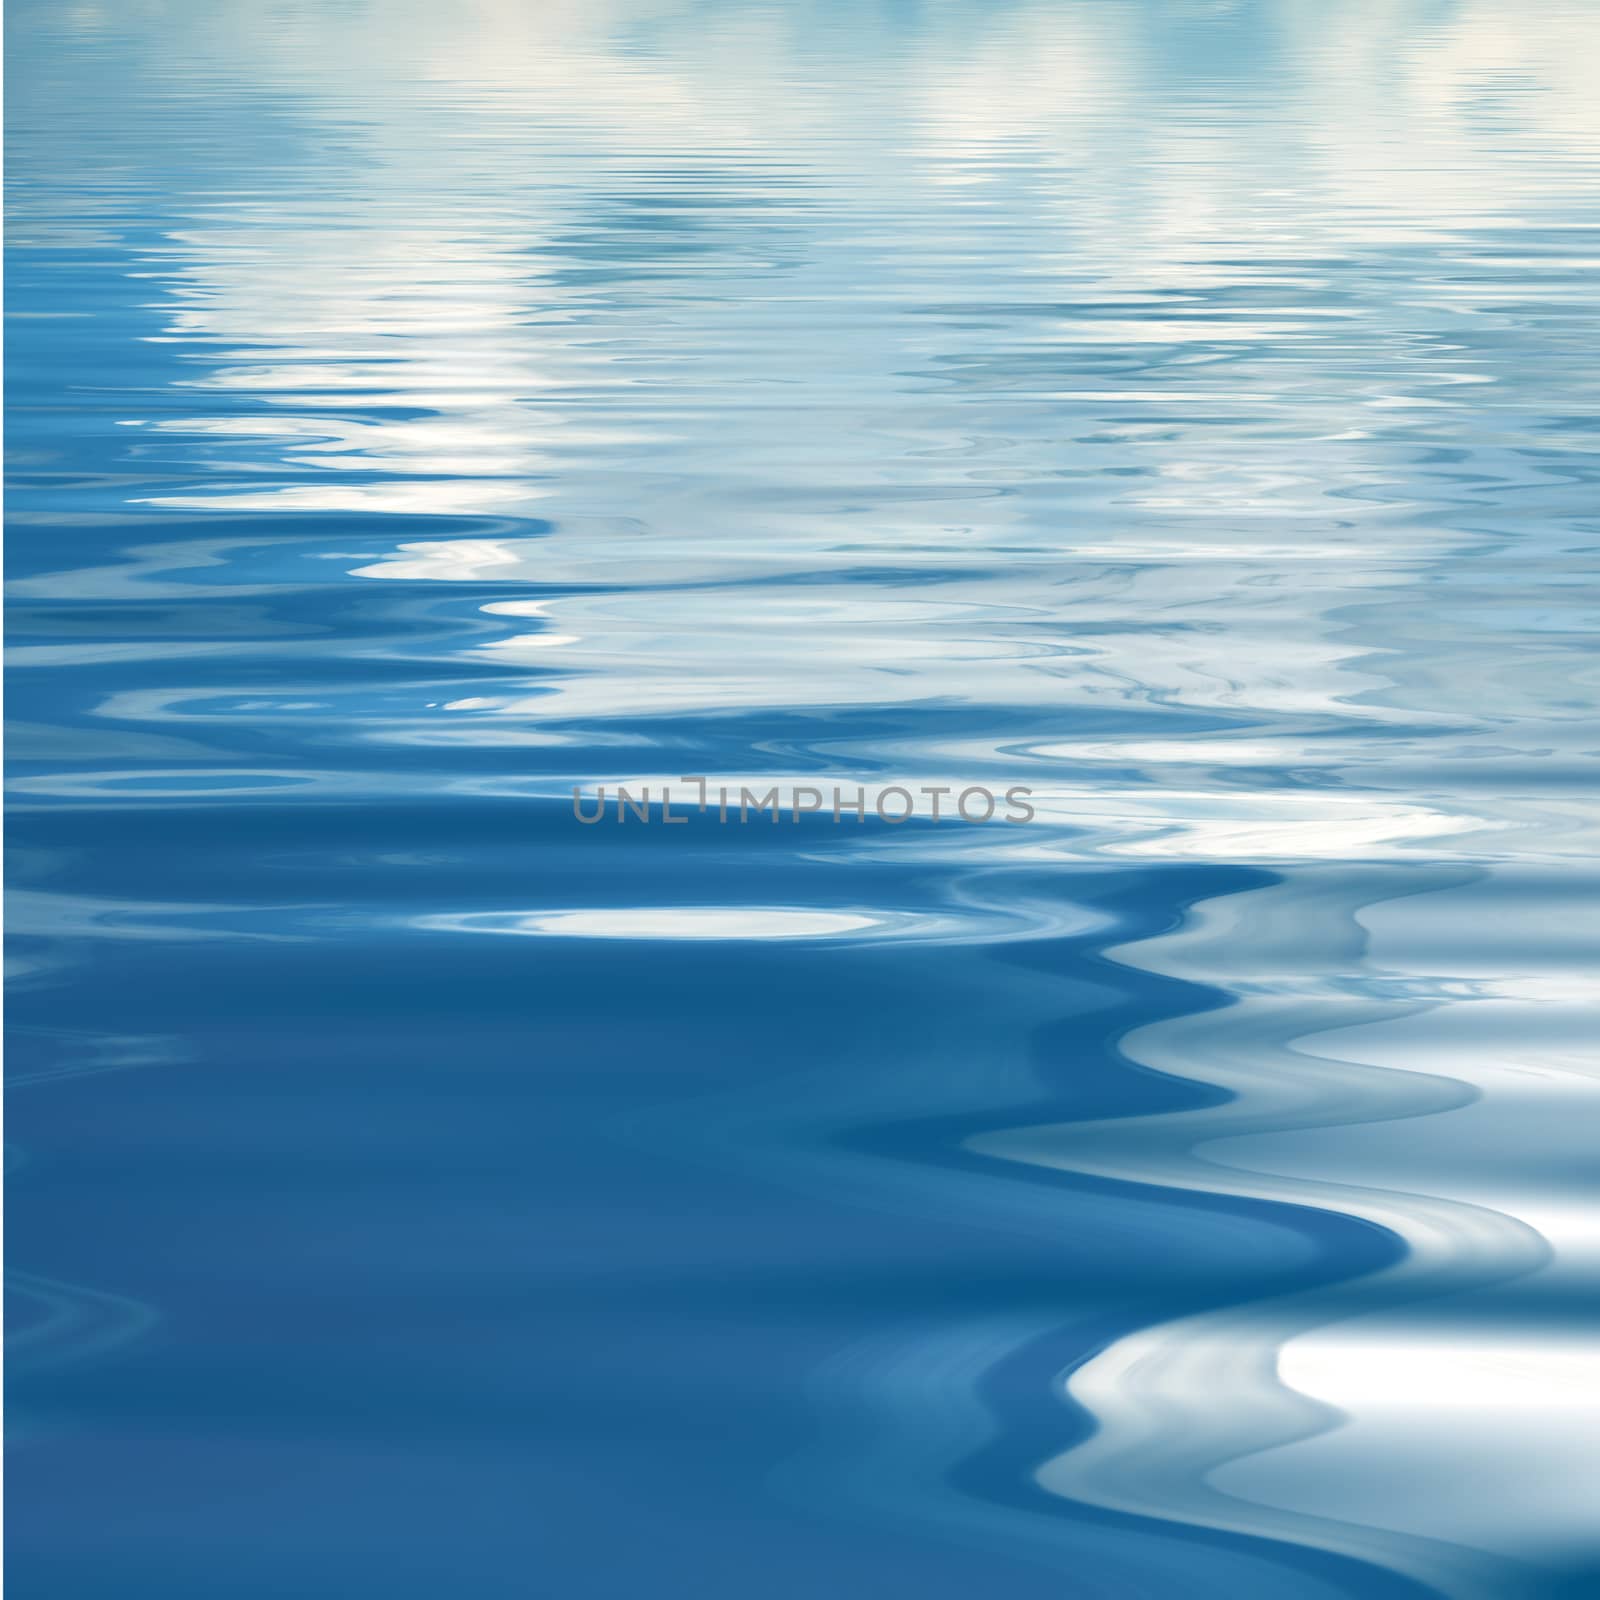 abstract series of waves on the water surface ripple background